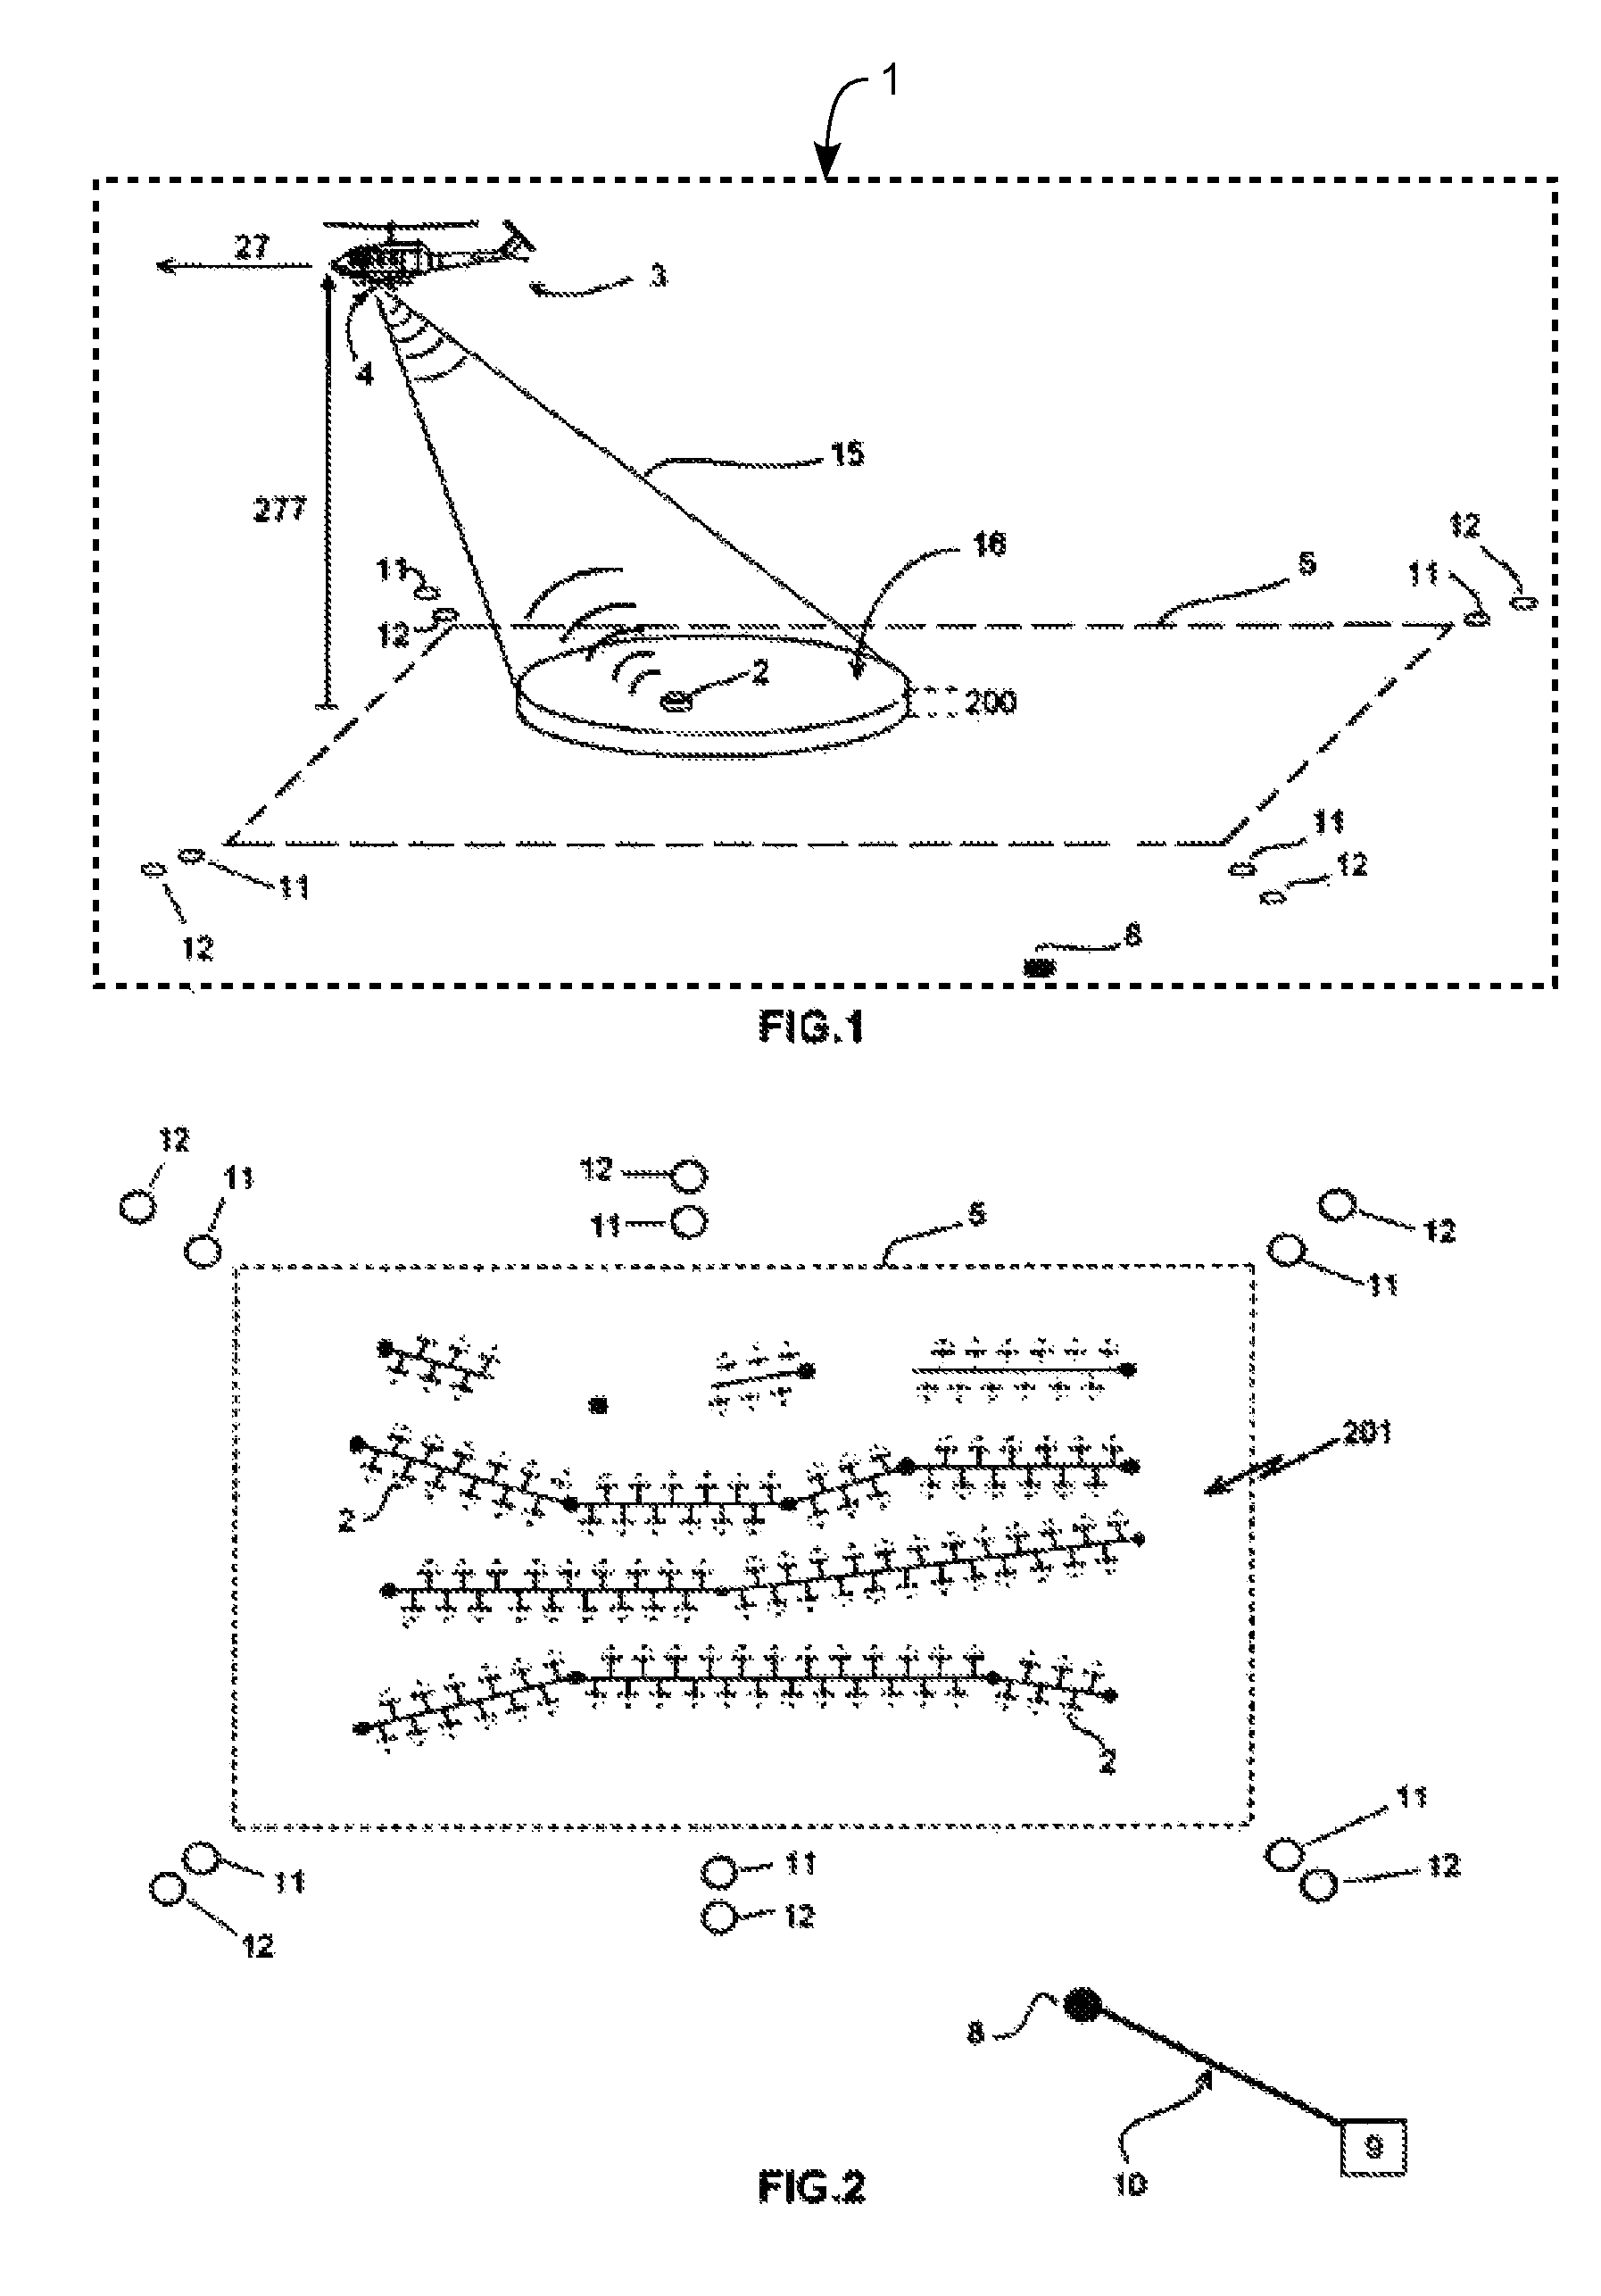 System and method for detecting, locating and identifying objects located above the ground and below the ground in a pre-referenced area of interest